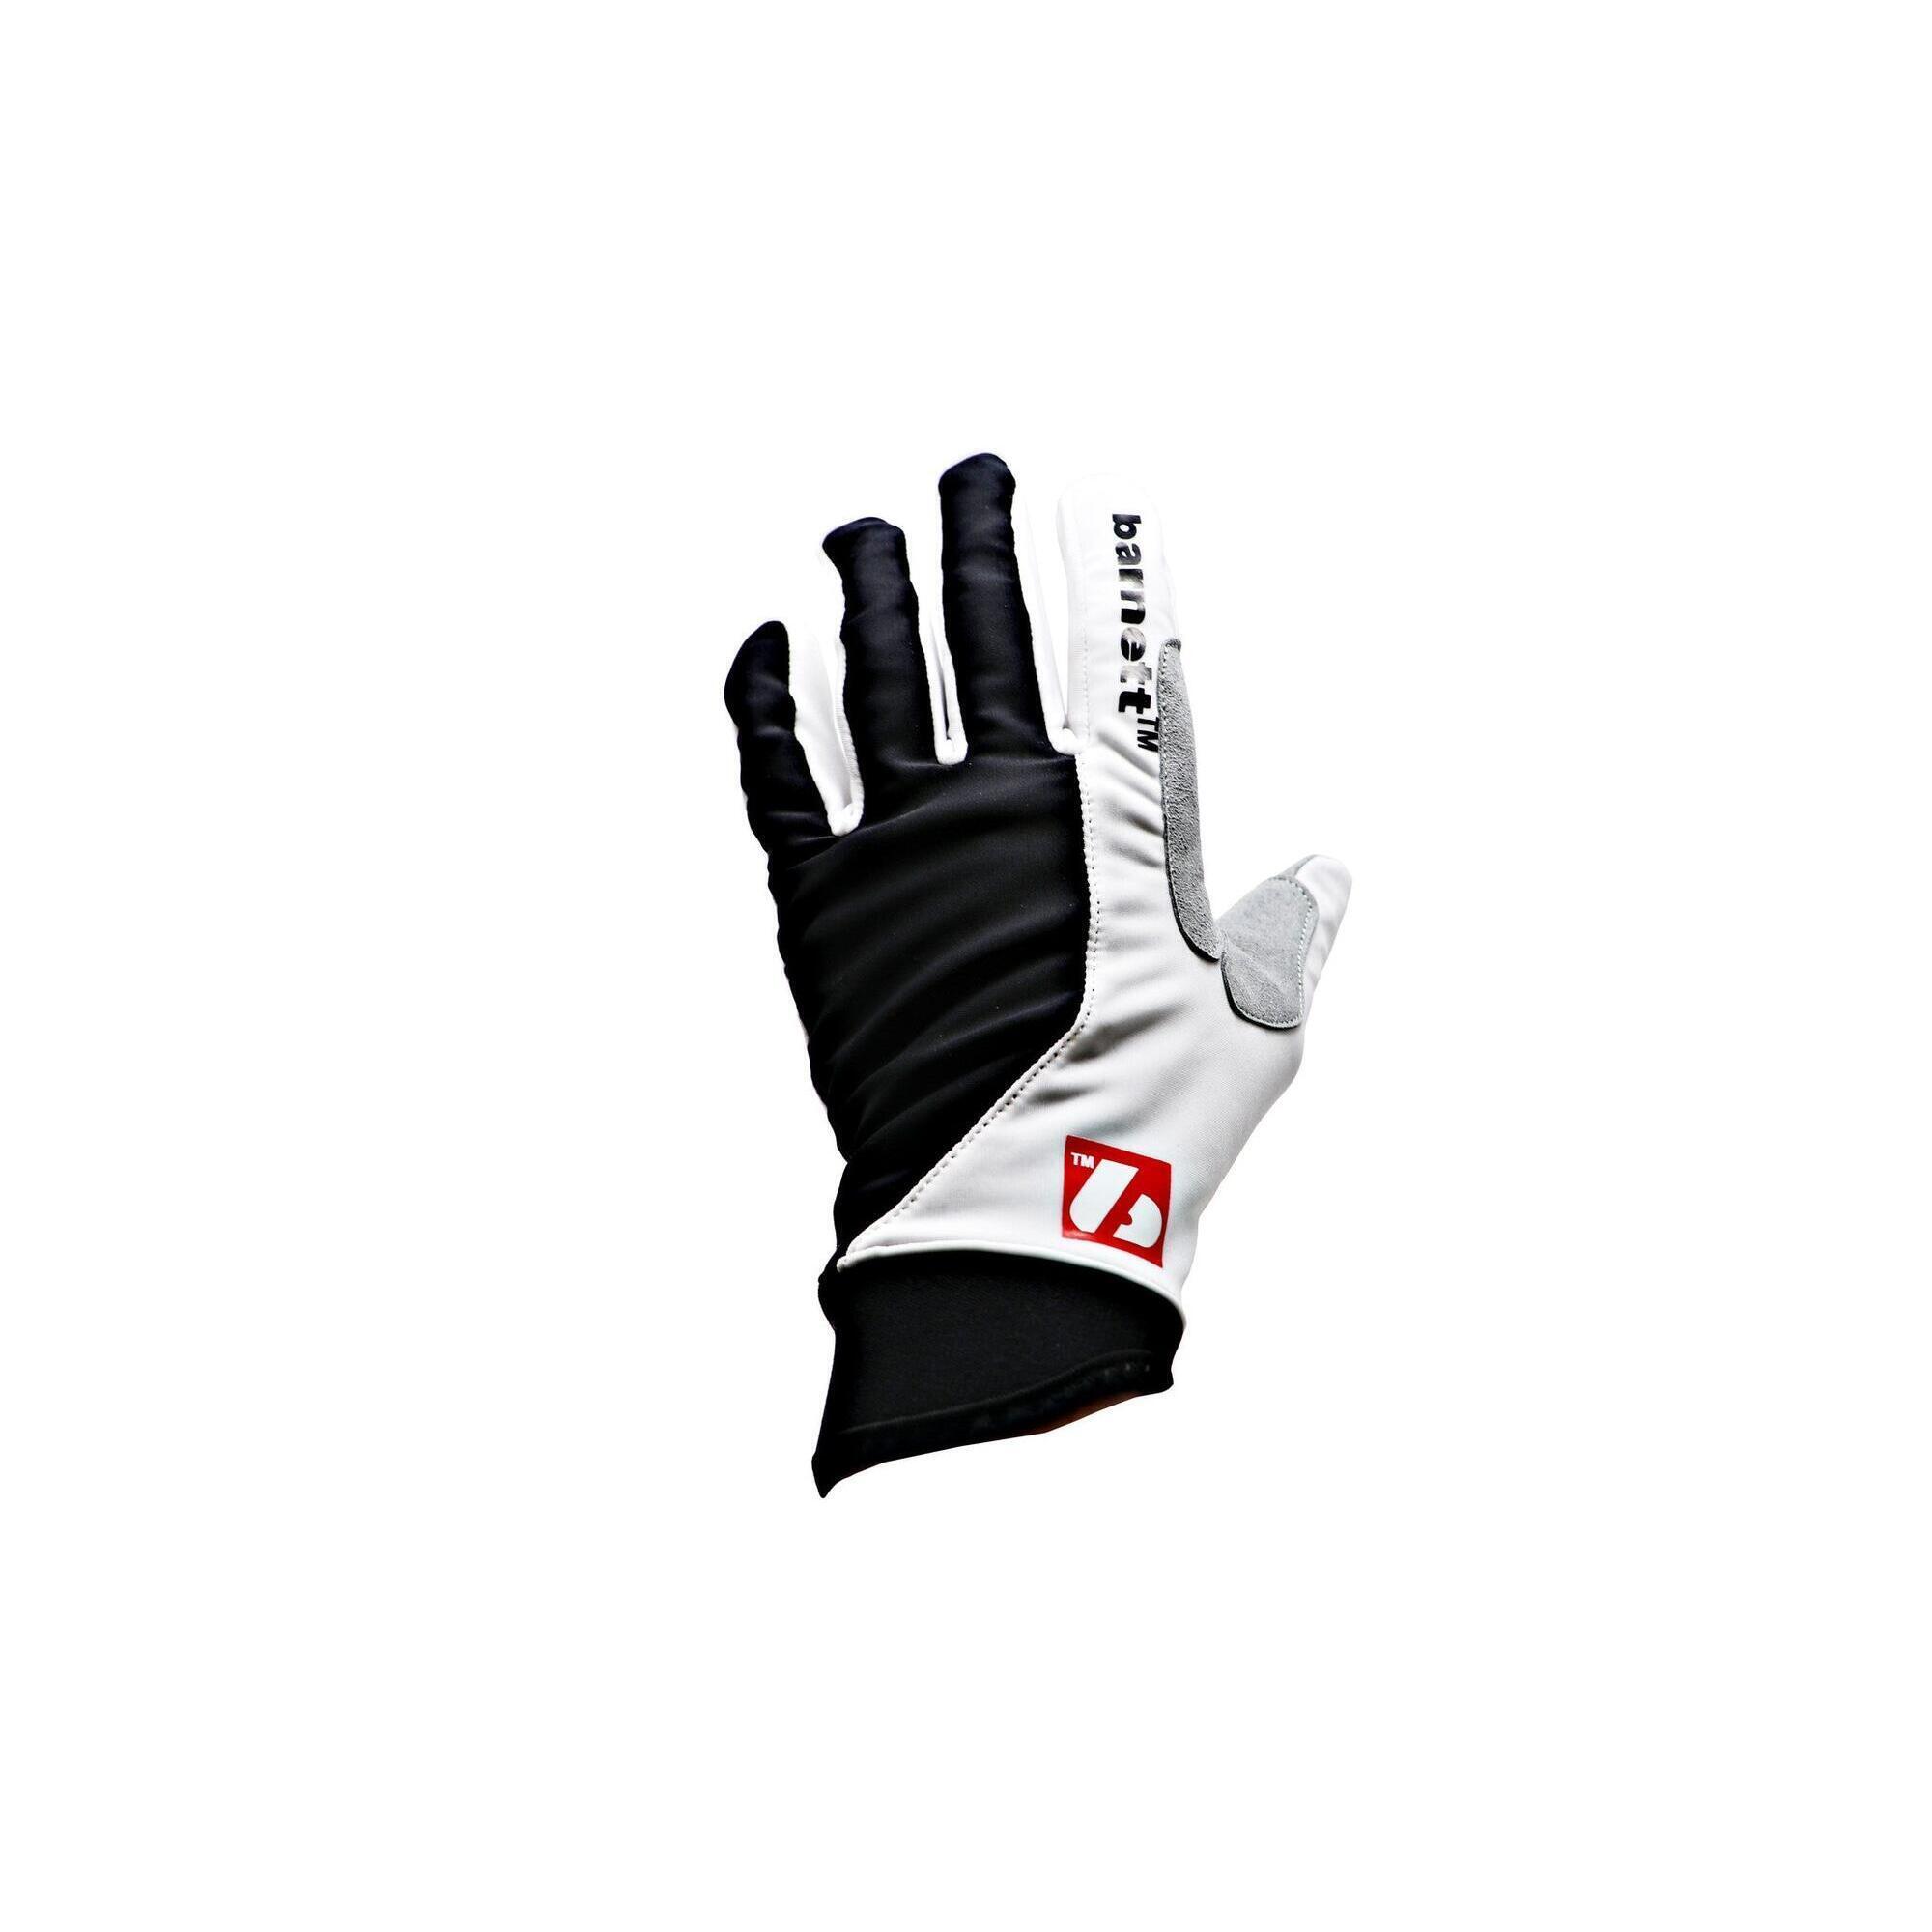  NBG-01 winter gloves for cross-country skiing 1/4